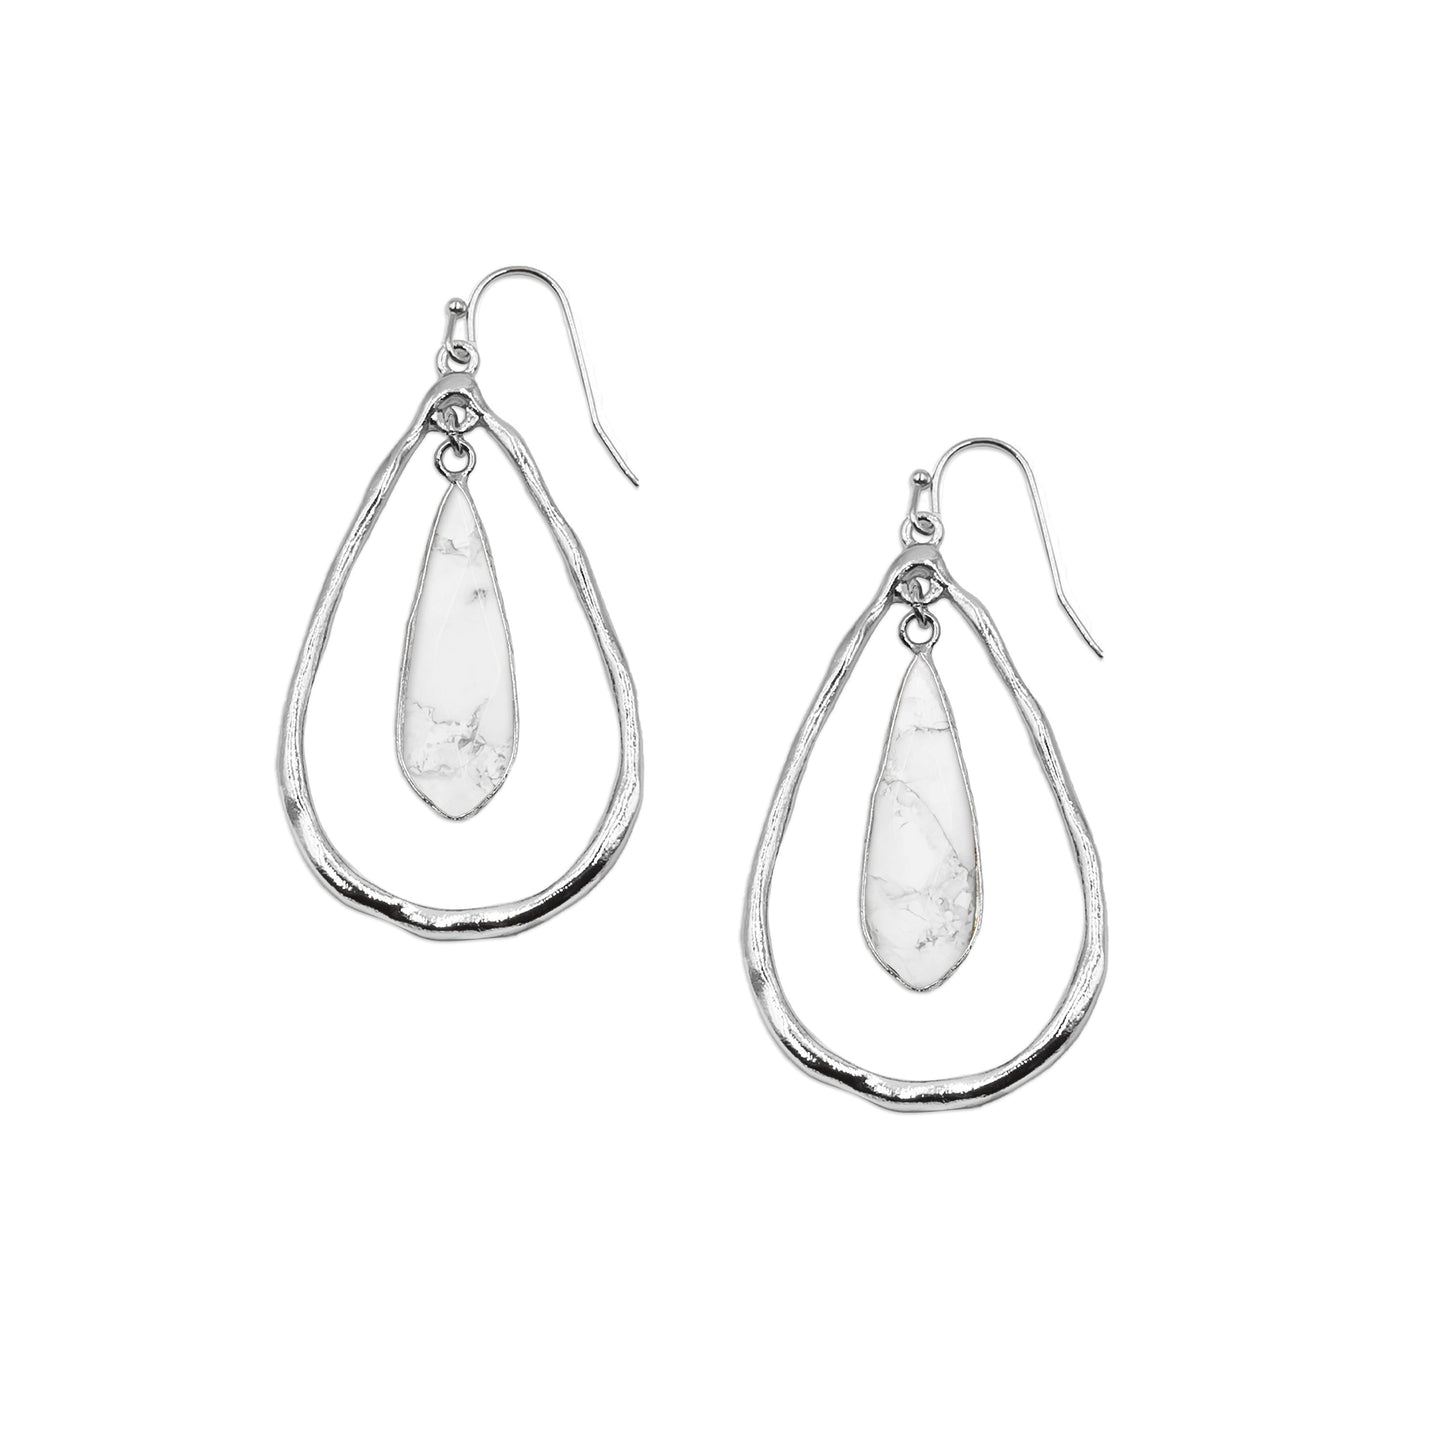 Zuri Collection - Silver Pepper Earrings